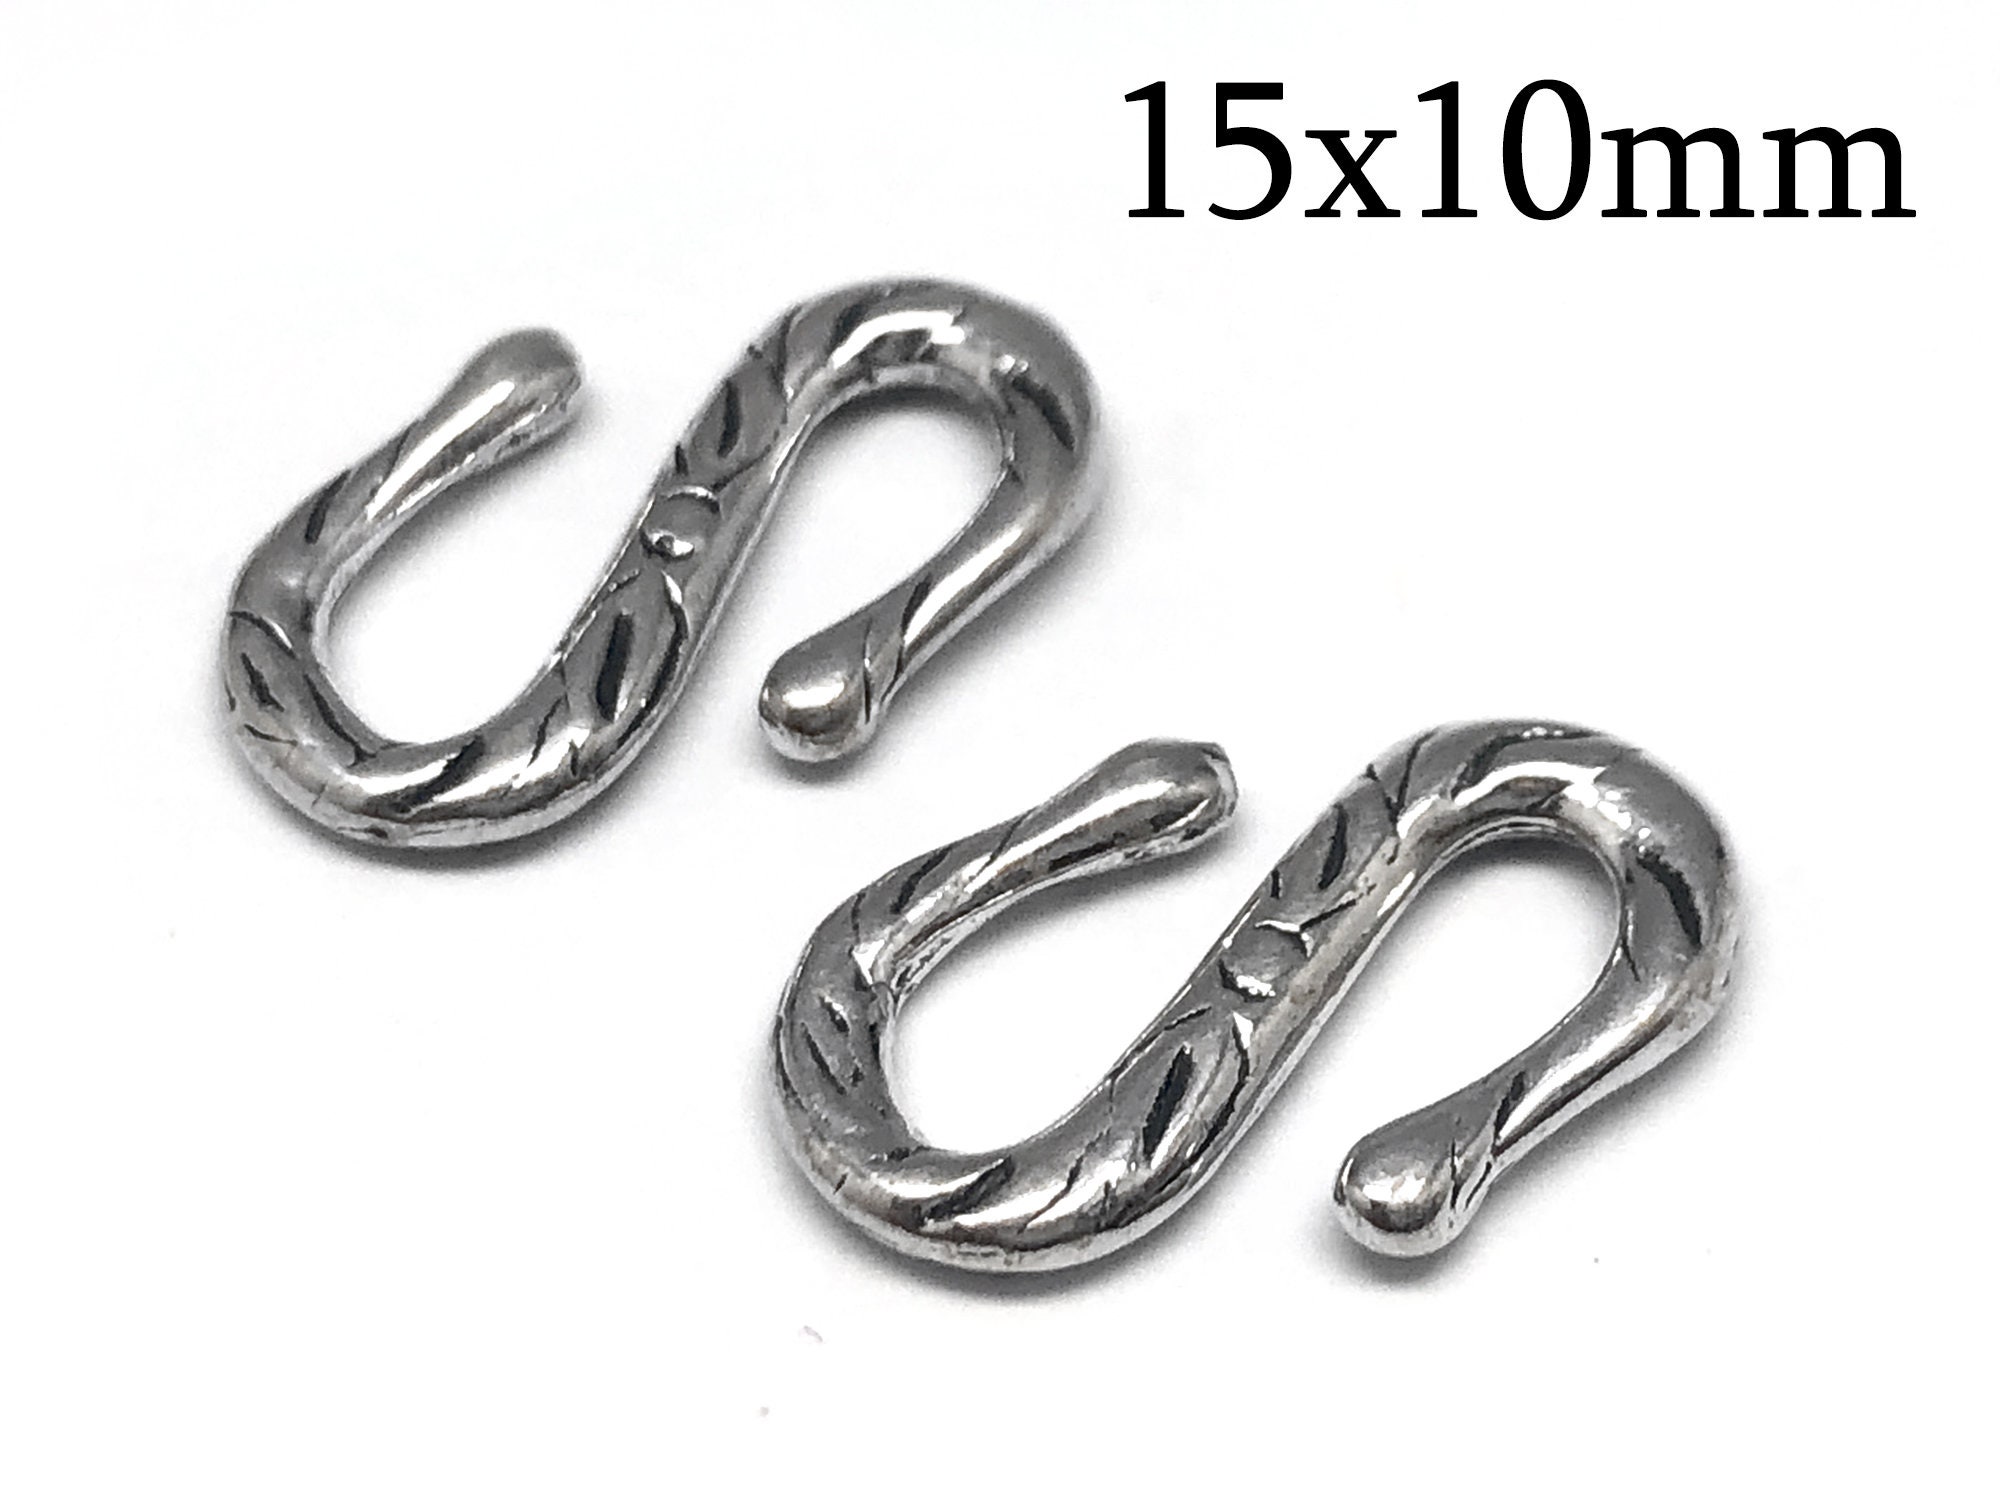 Sterling Silver Hook and Eye Clasps, 925 Silver Thin Hook Clasps, Polished  Hook and Eye Connector, Clasp Connector for Necklace -  Canada